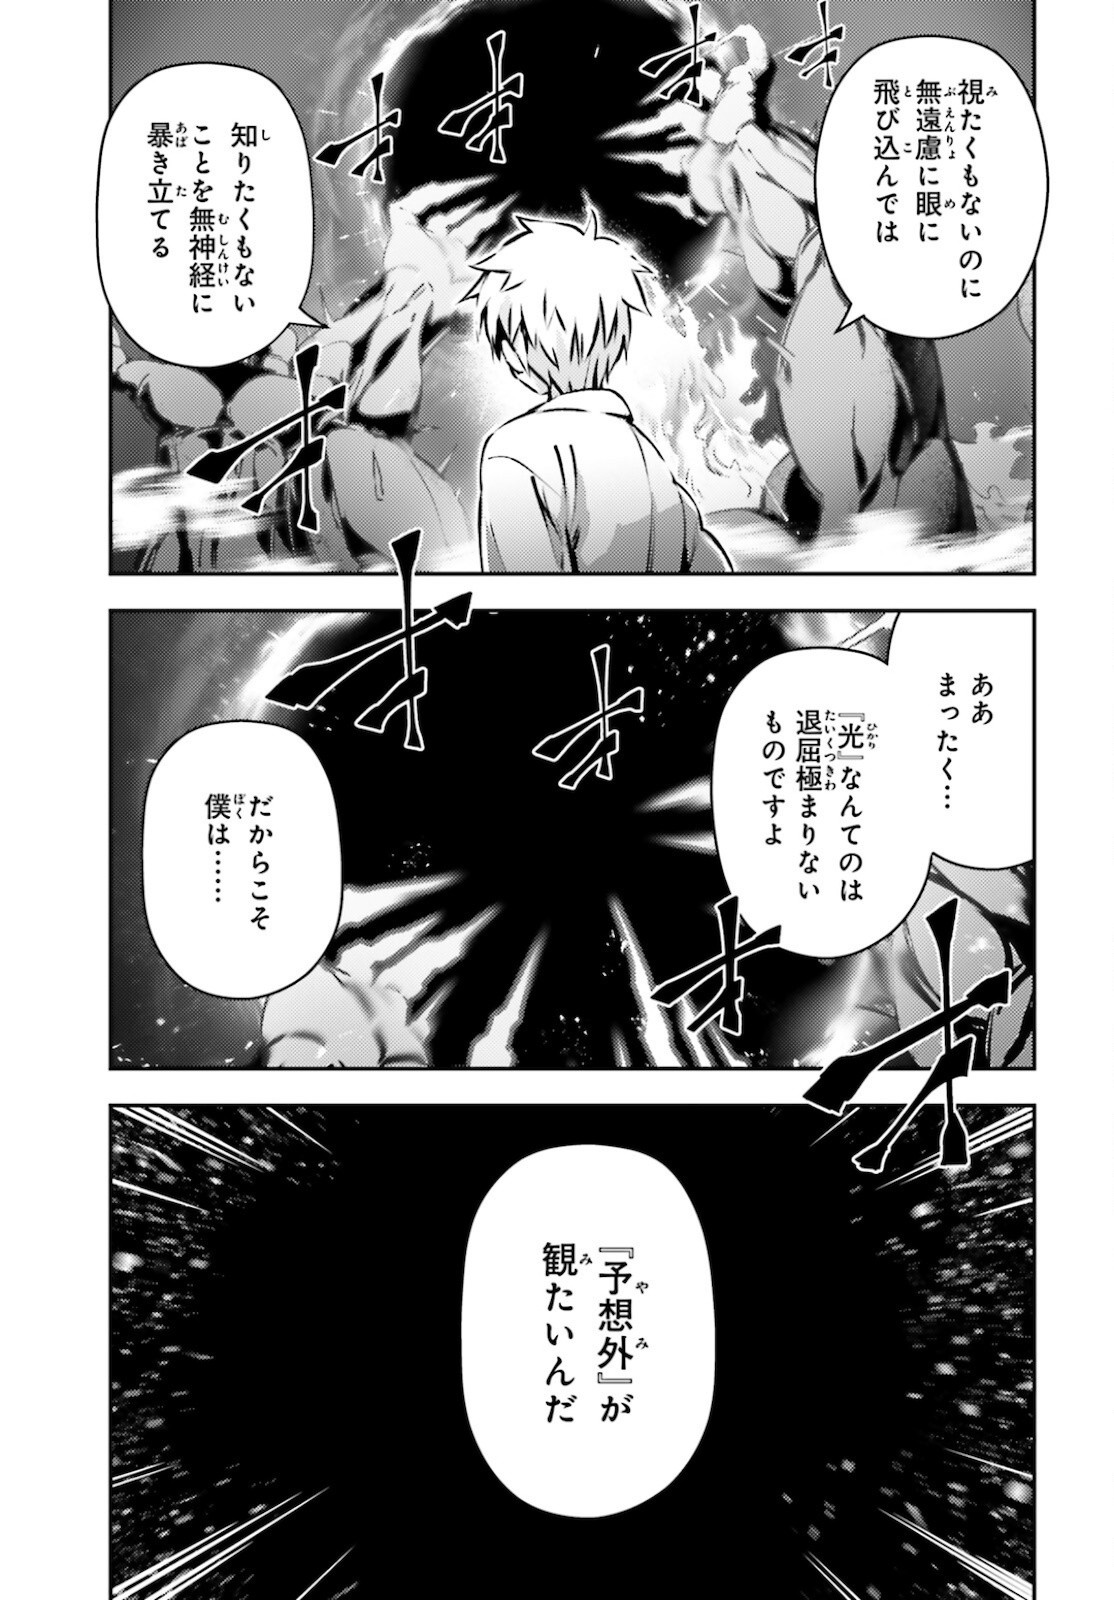 Fate/Kaleid Liner Prisma Illya Drei! - Chapter 66-2 - Page 3